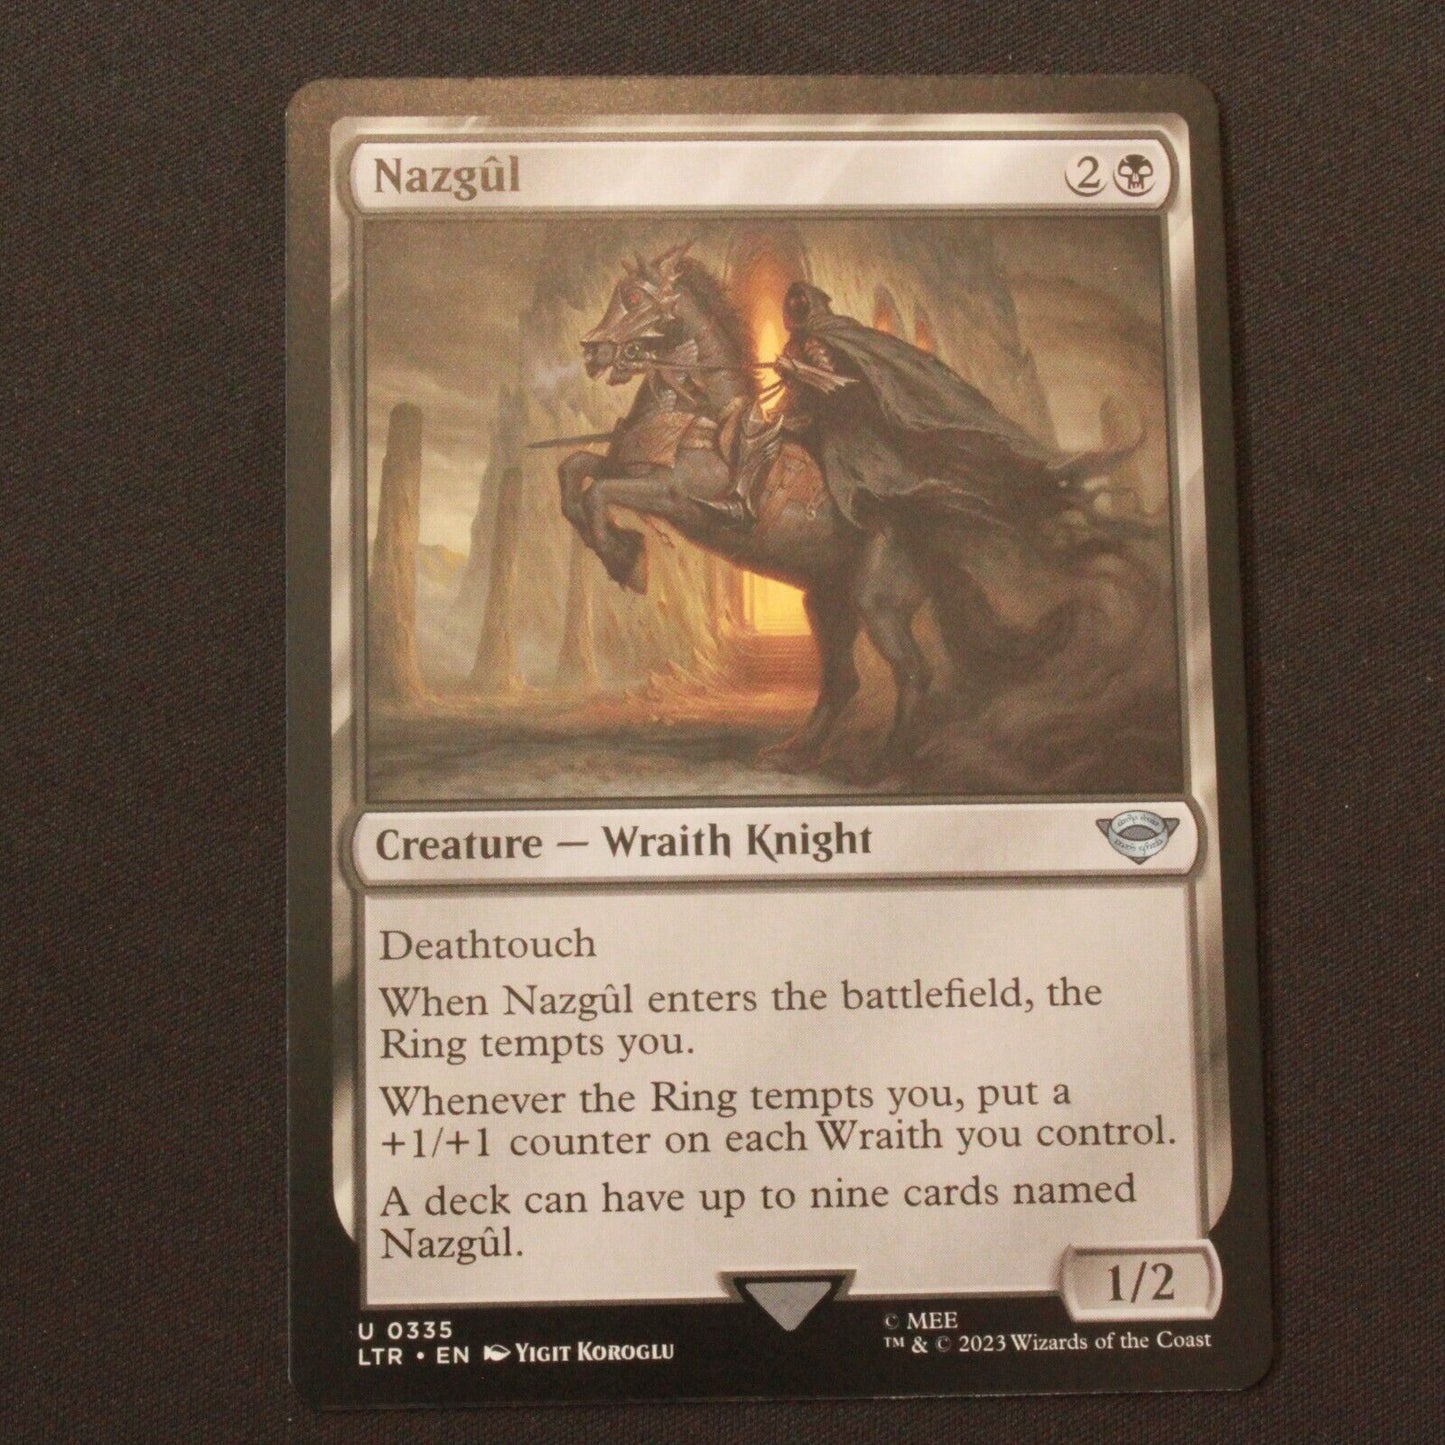 MTG The Lord of the Rings: (LTR) Uncommon Nazgul (0335) 335 NM